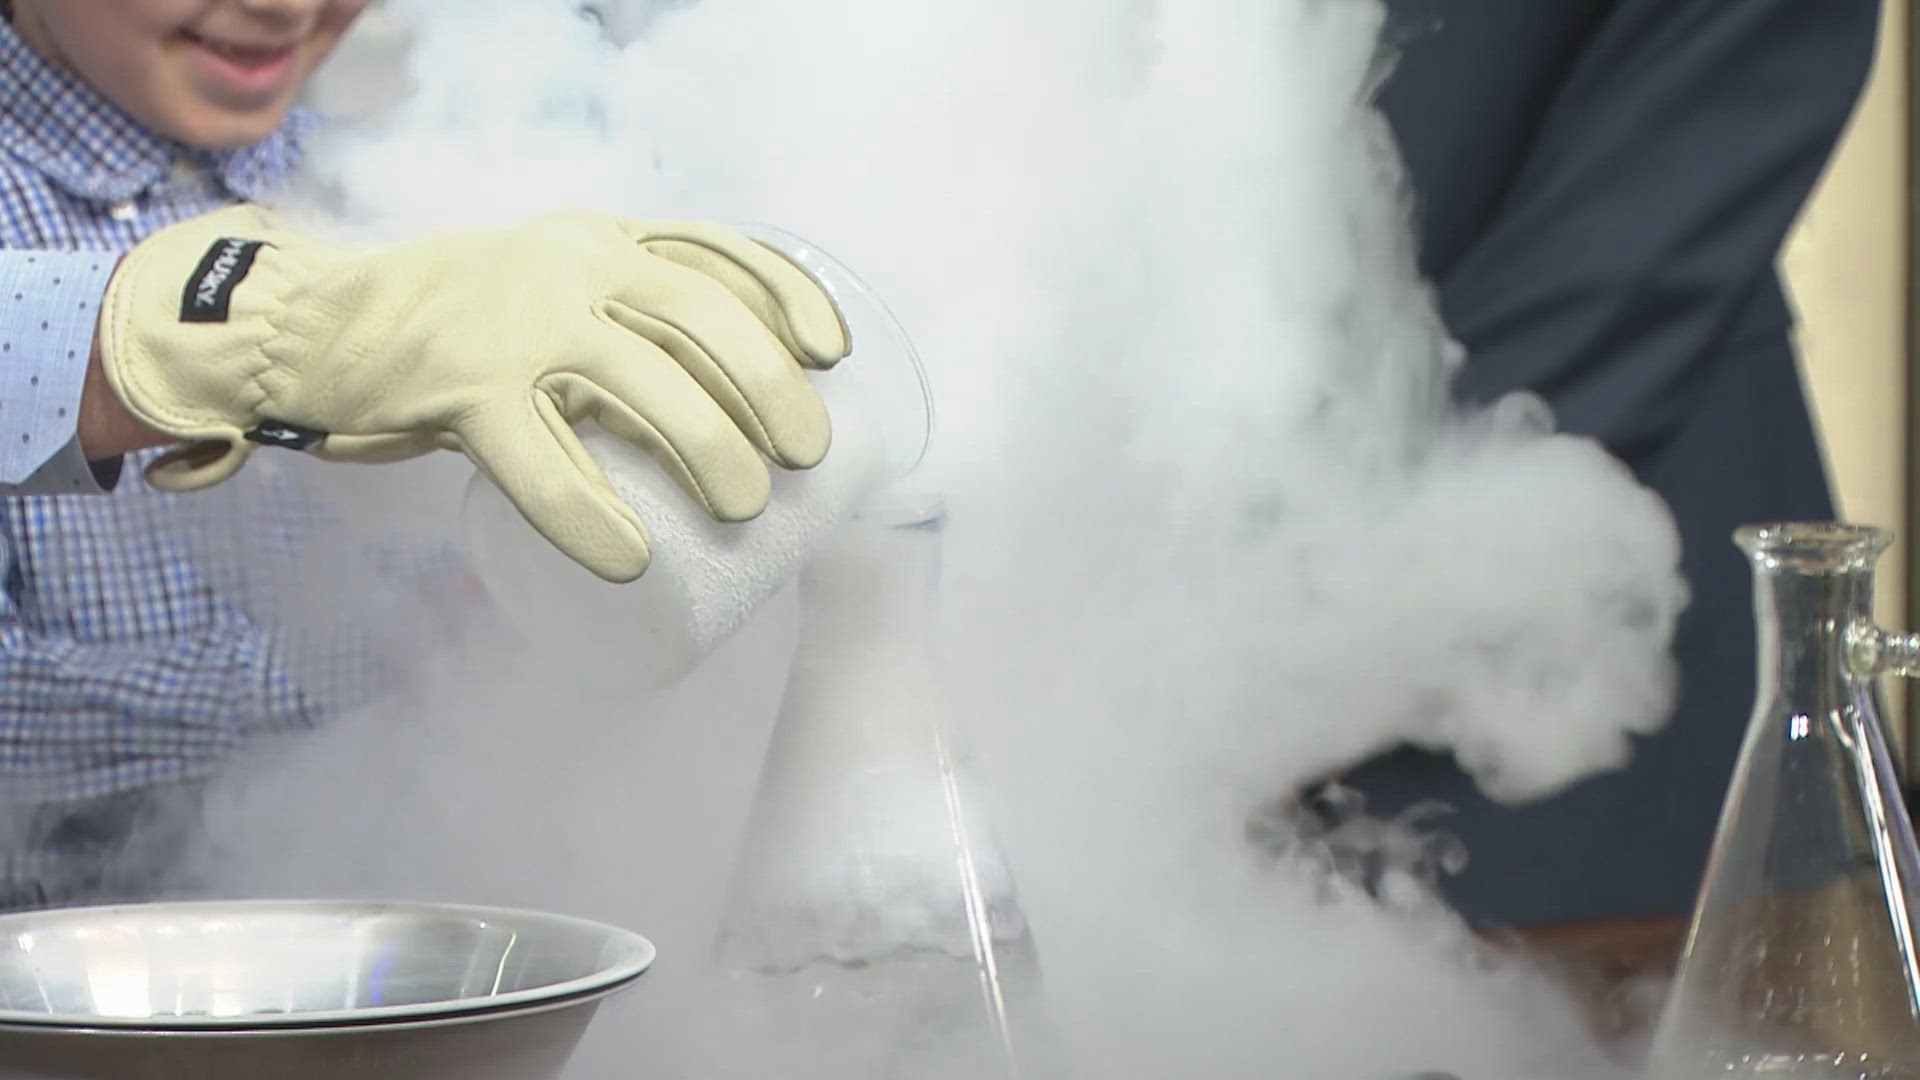 Steve Spangler and a special science helper show us some super cool science with liquid nitrogen.